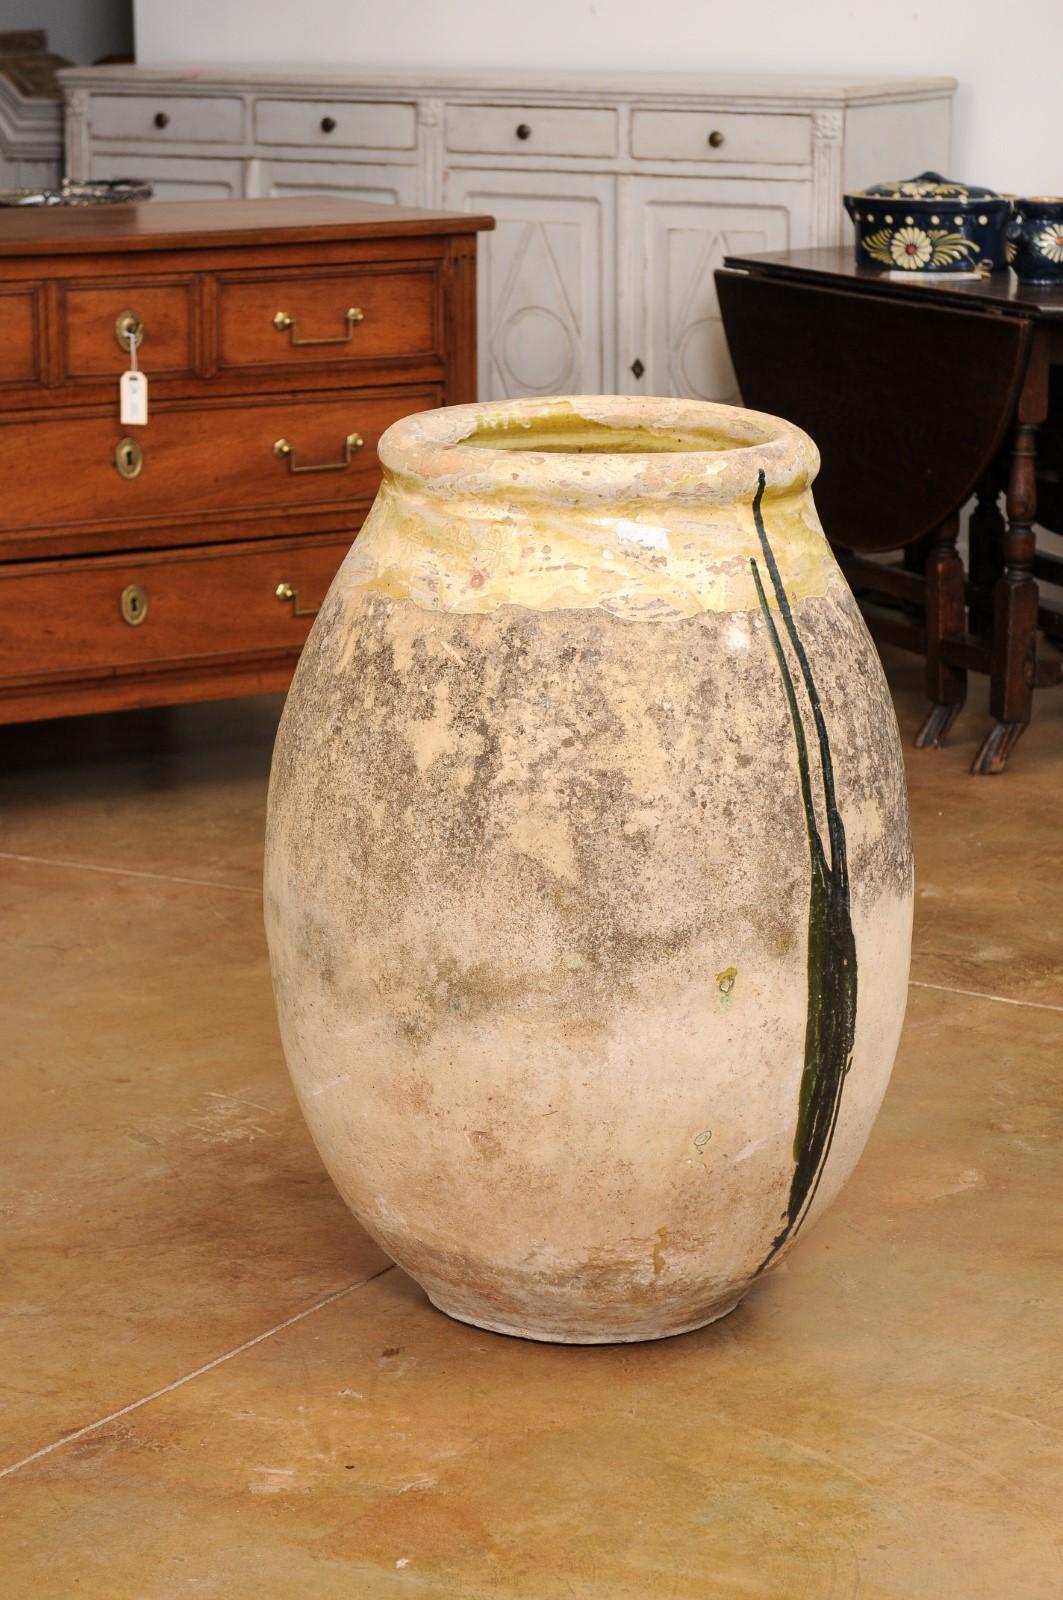 French 19th Century Terracotta Biot Jar with Yellow Glaze and Rustic Character For Sale 5